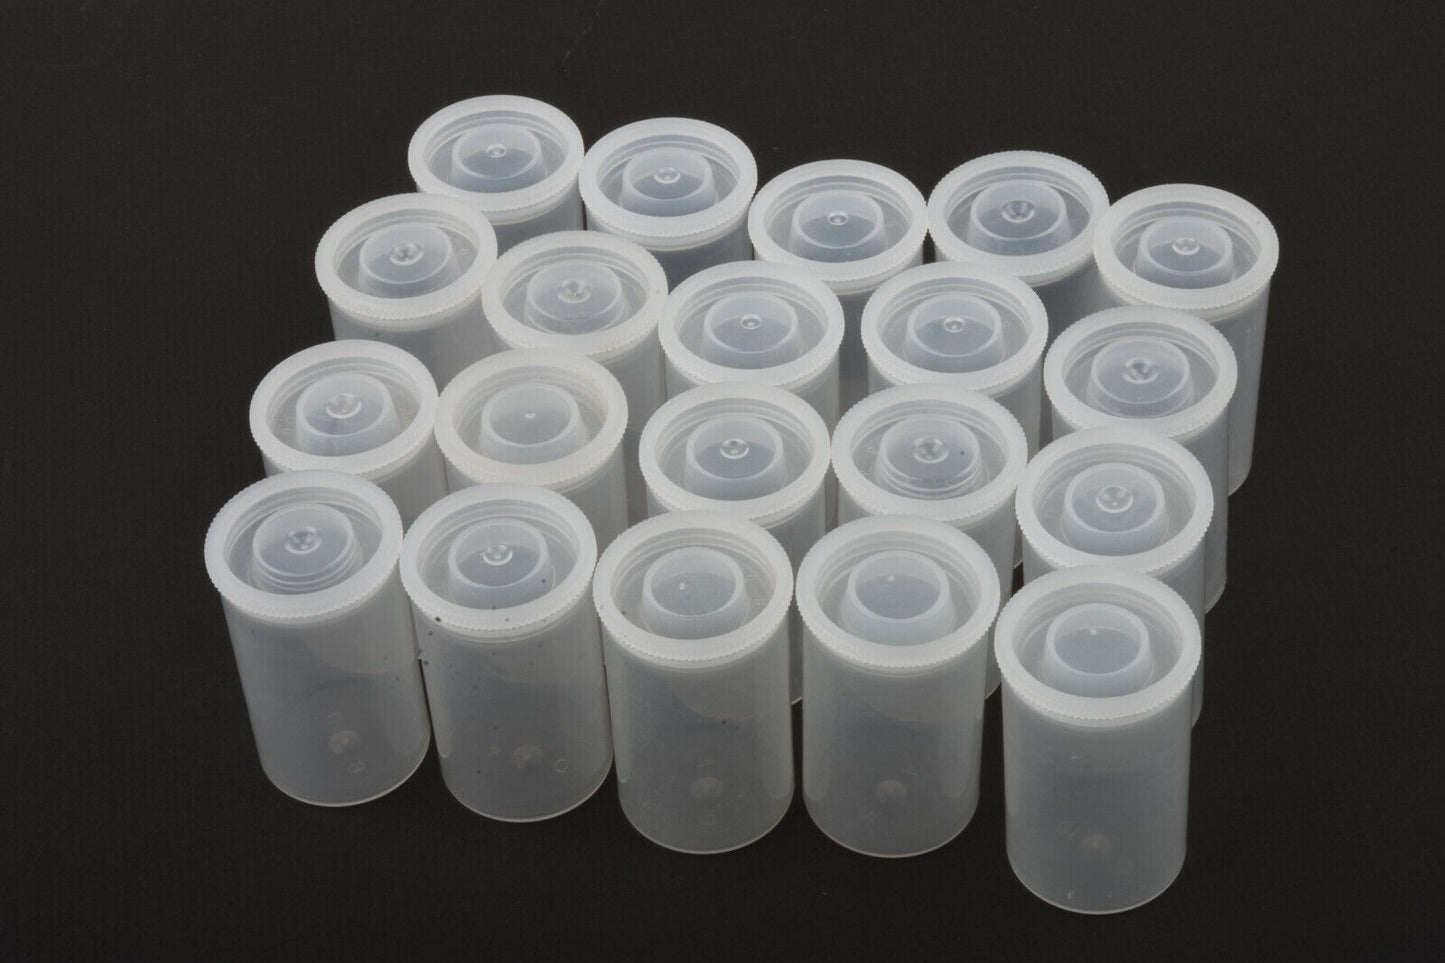 20X FUJI 35mm PLASTIC CASSETTE CANISTER ONLY (CLEAR)